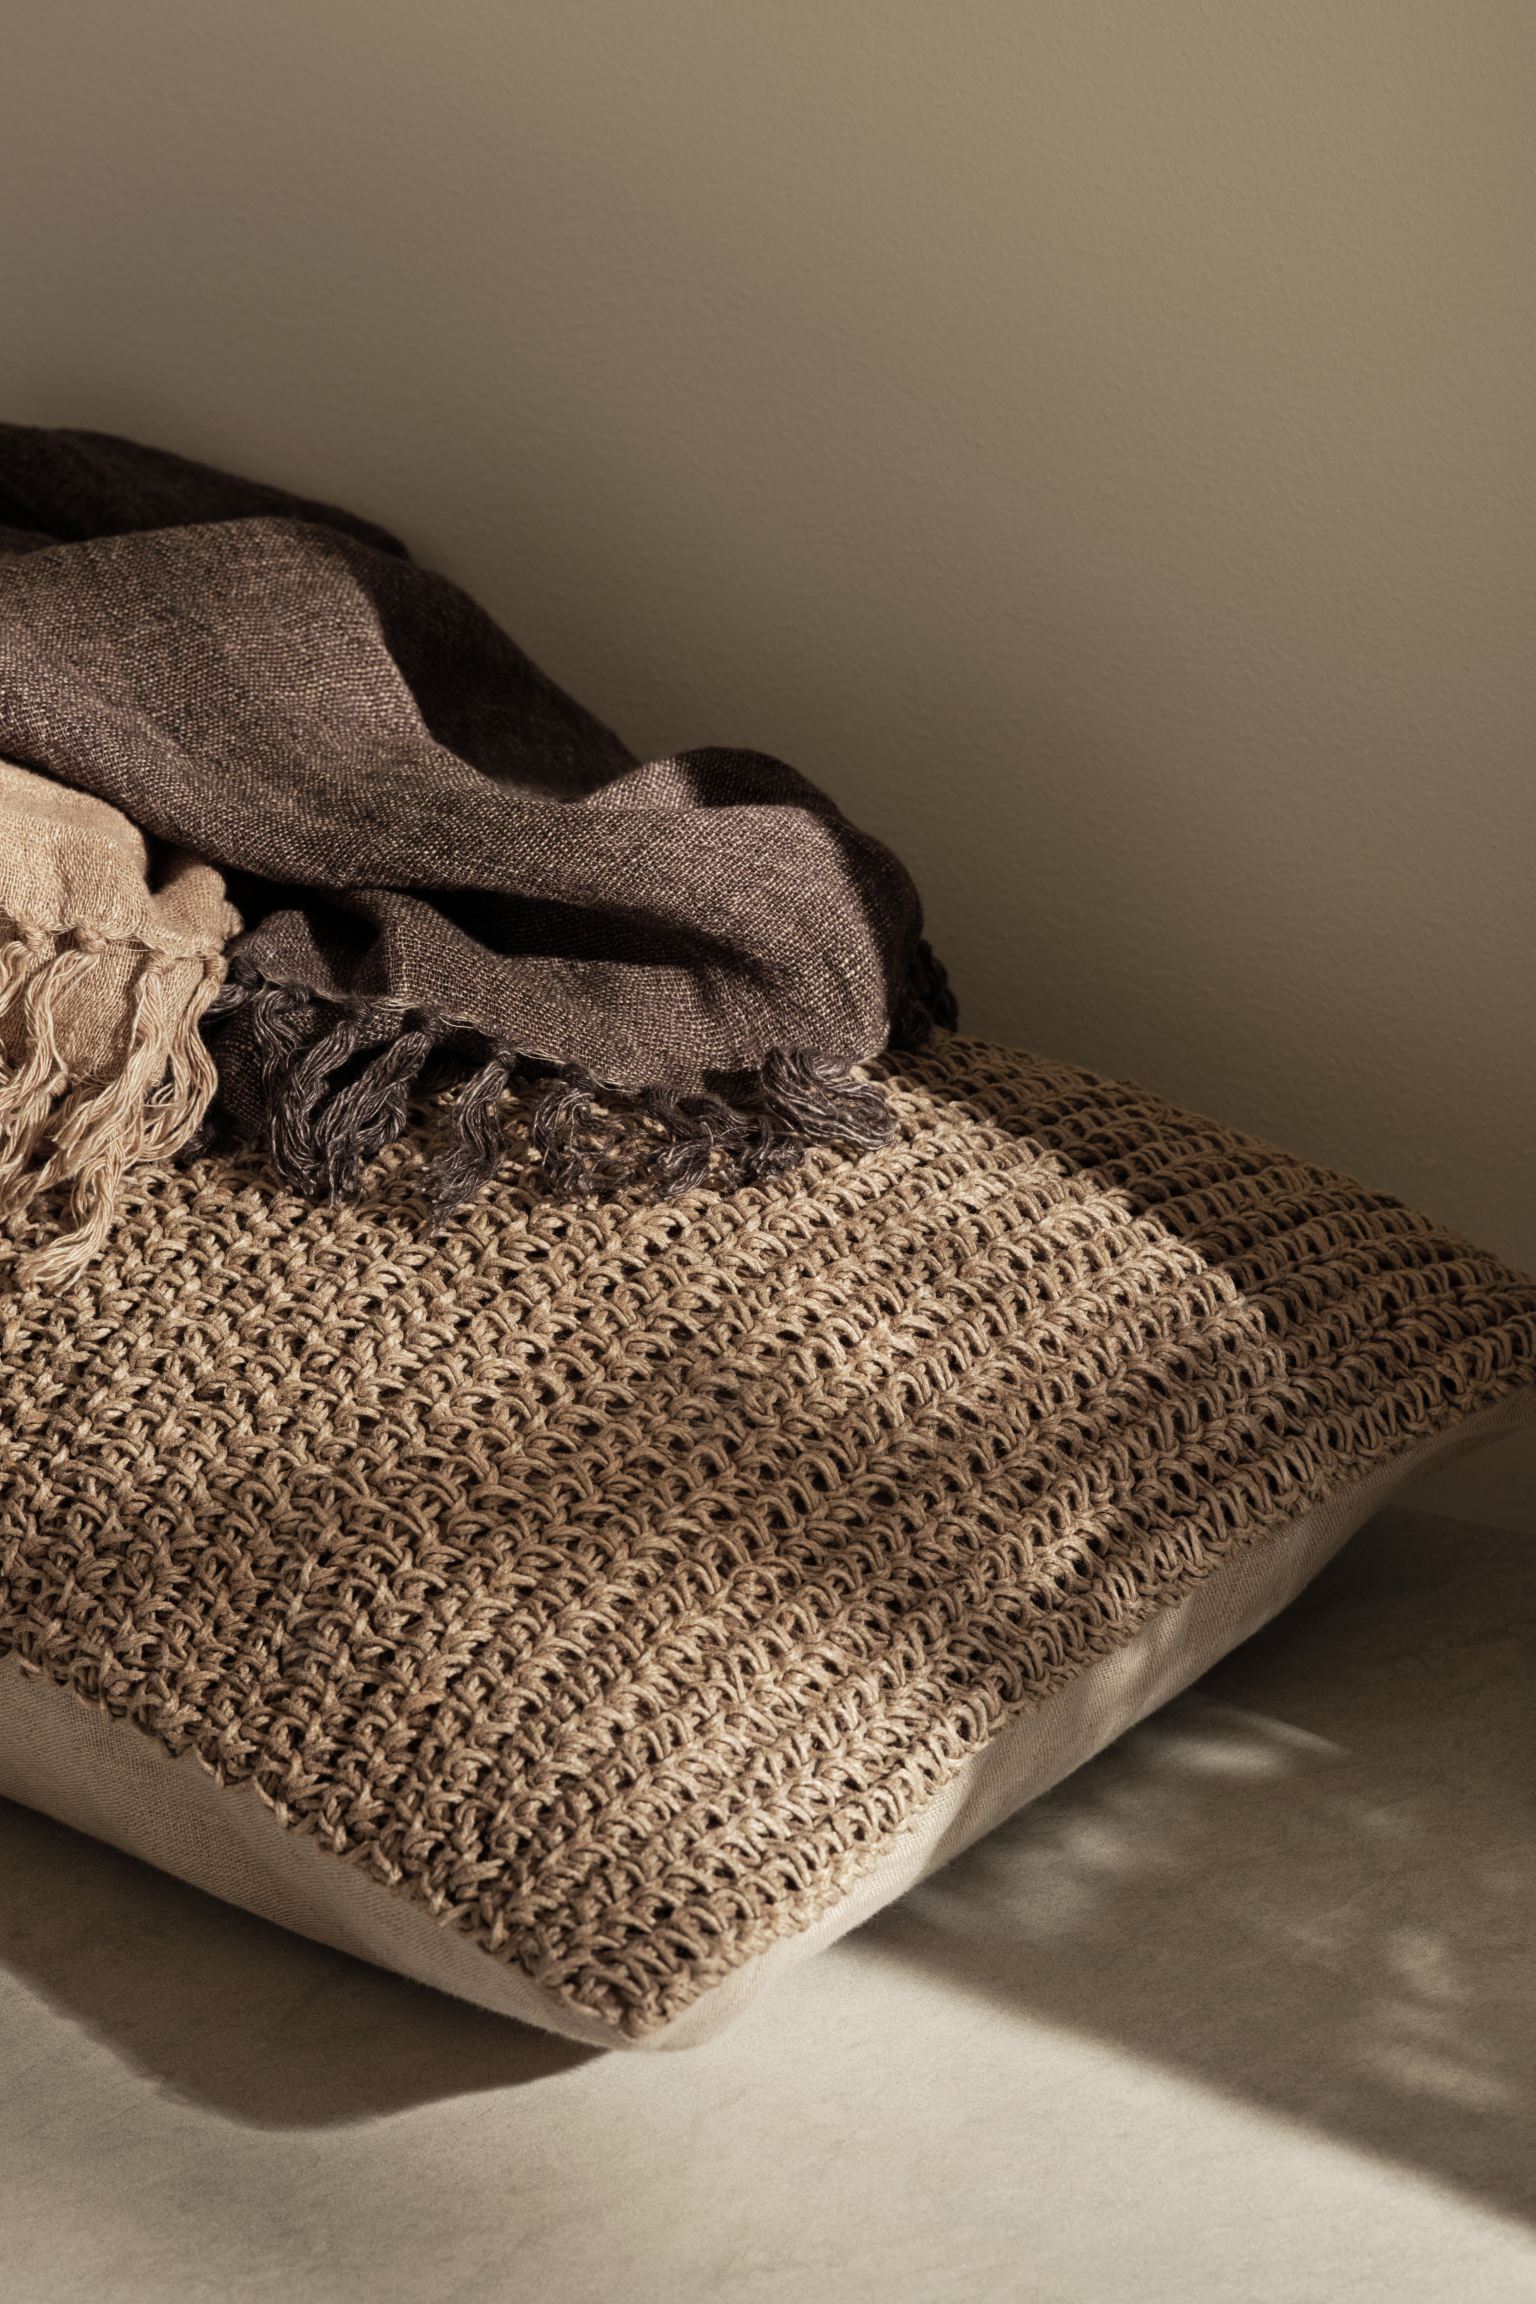 Hand-knitted jute cushion from the H&M HOME craft collection